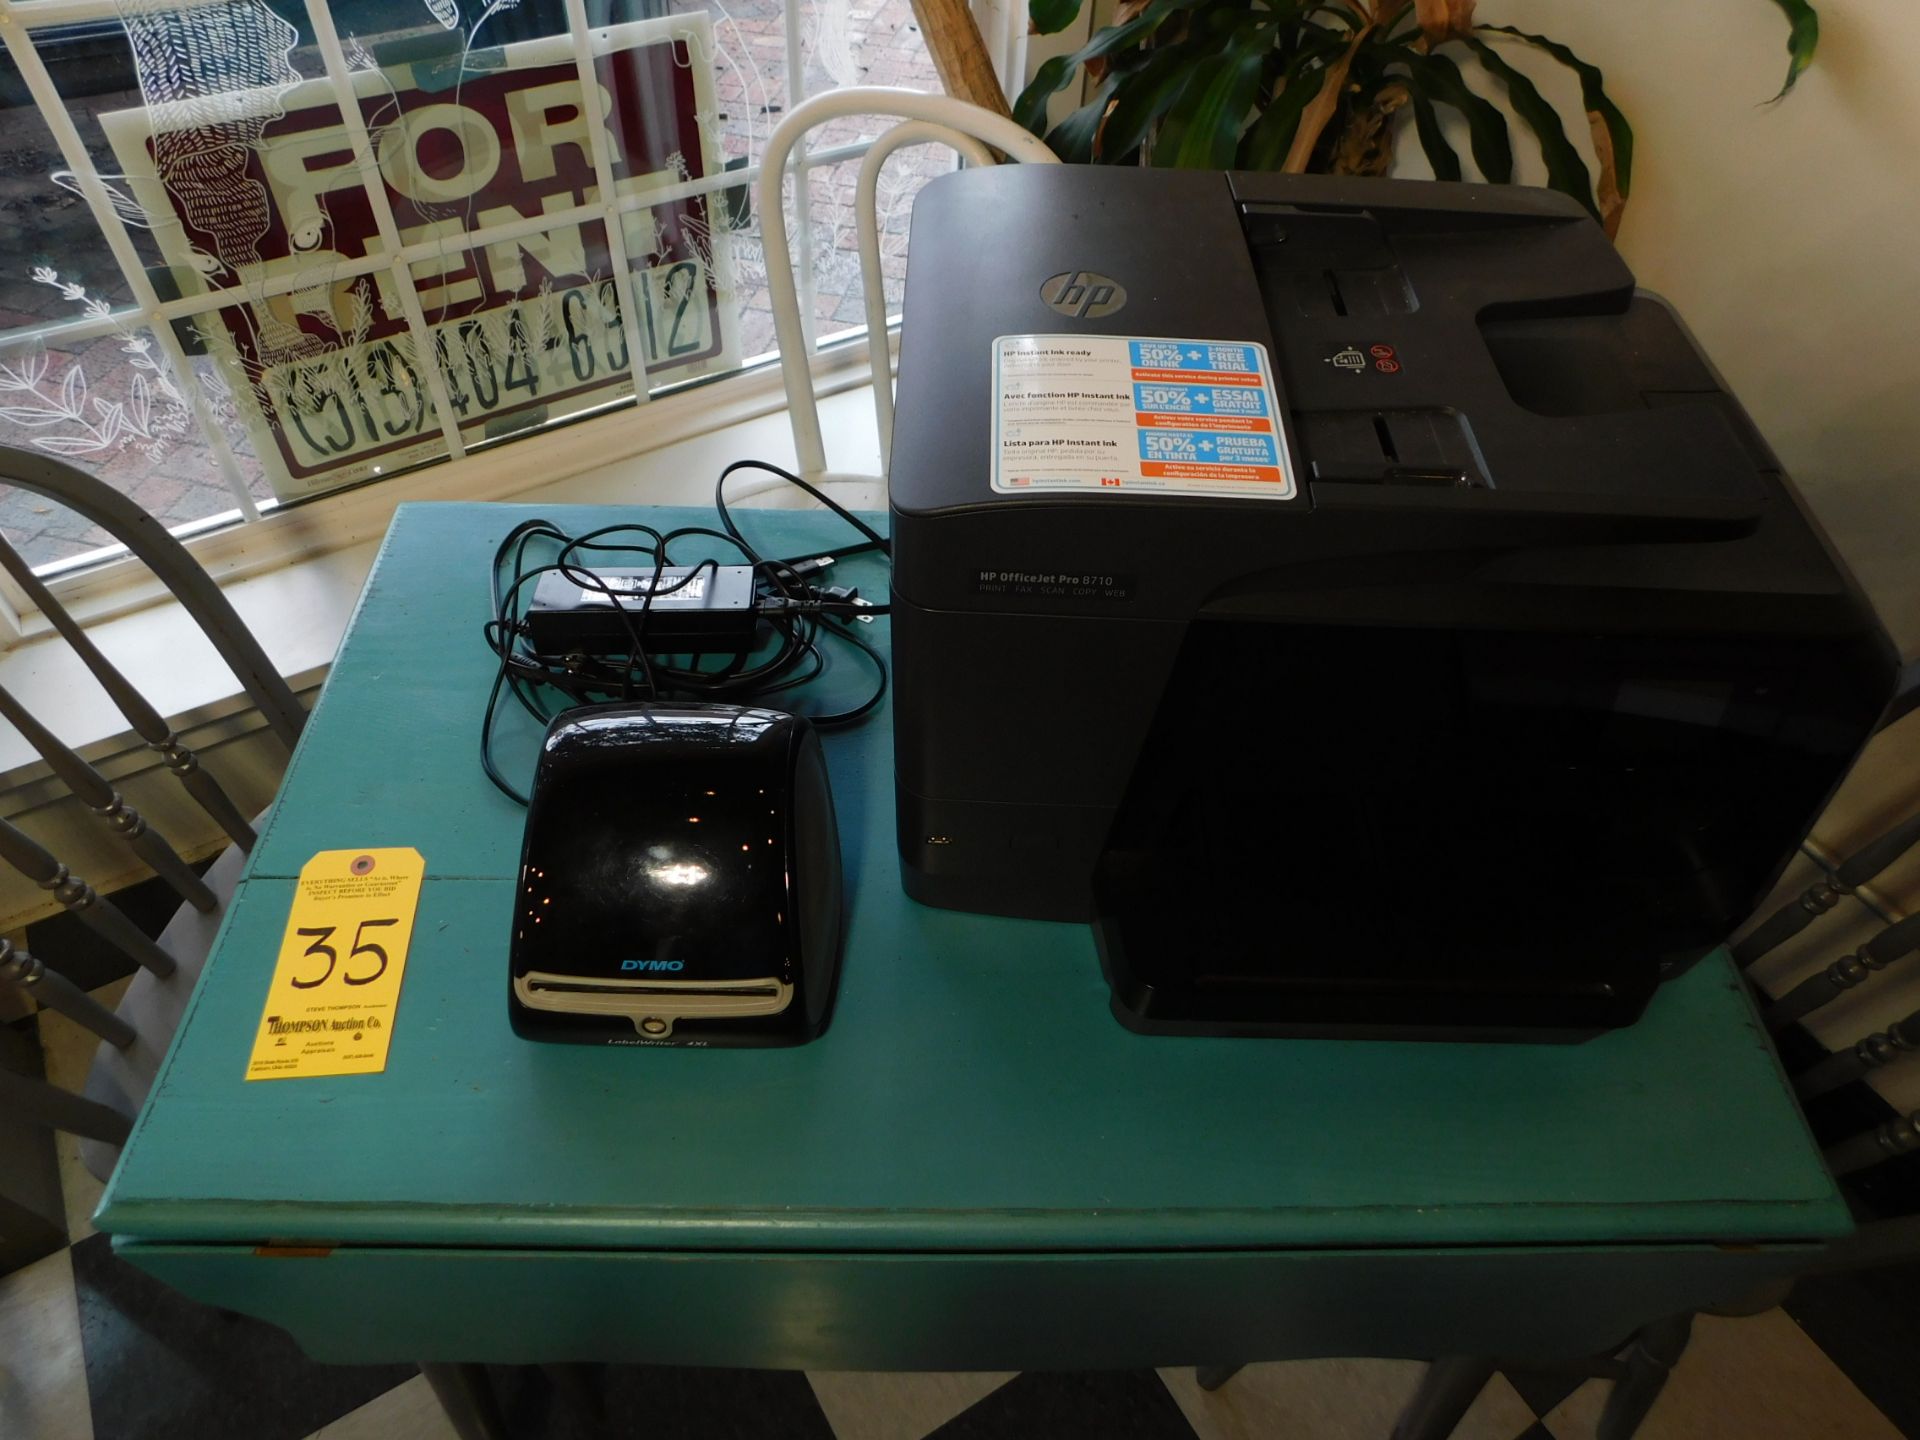 HP Officejet PRO Model 87-10 with Dymo Laser Writer and Model 4XL Printer